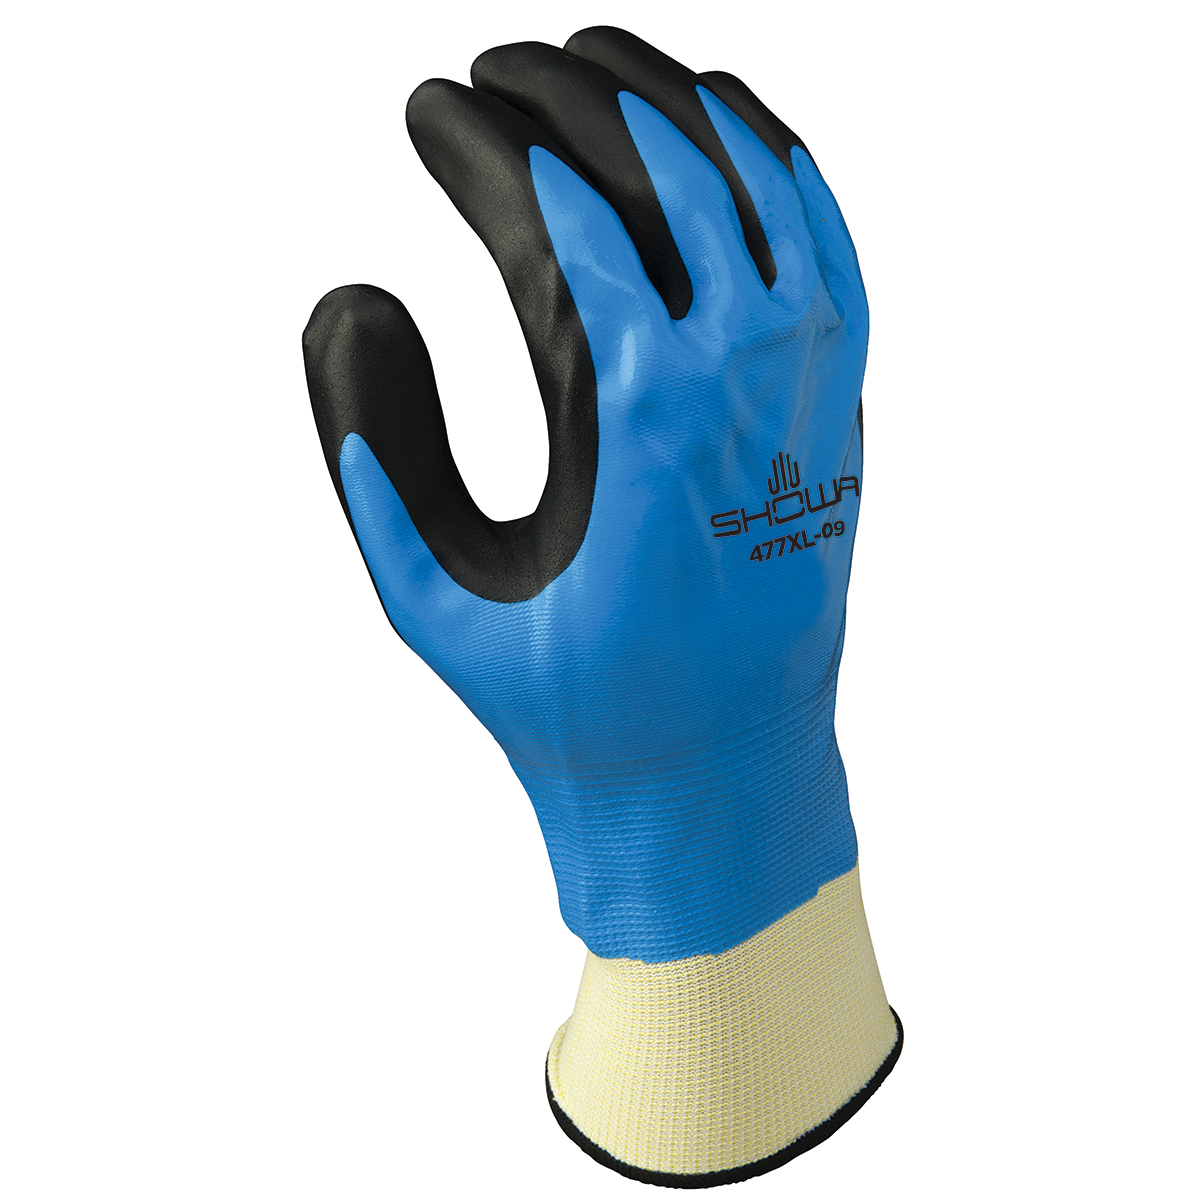 SHOWA® Size 10 Black, Blue And White Foam Nitrile Acrylic/Polyester/Nylon Lined Cold Weather Gloves